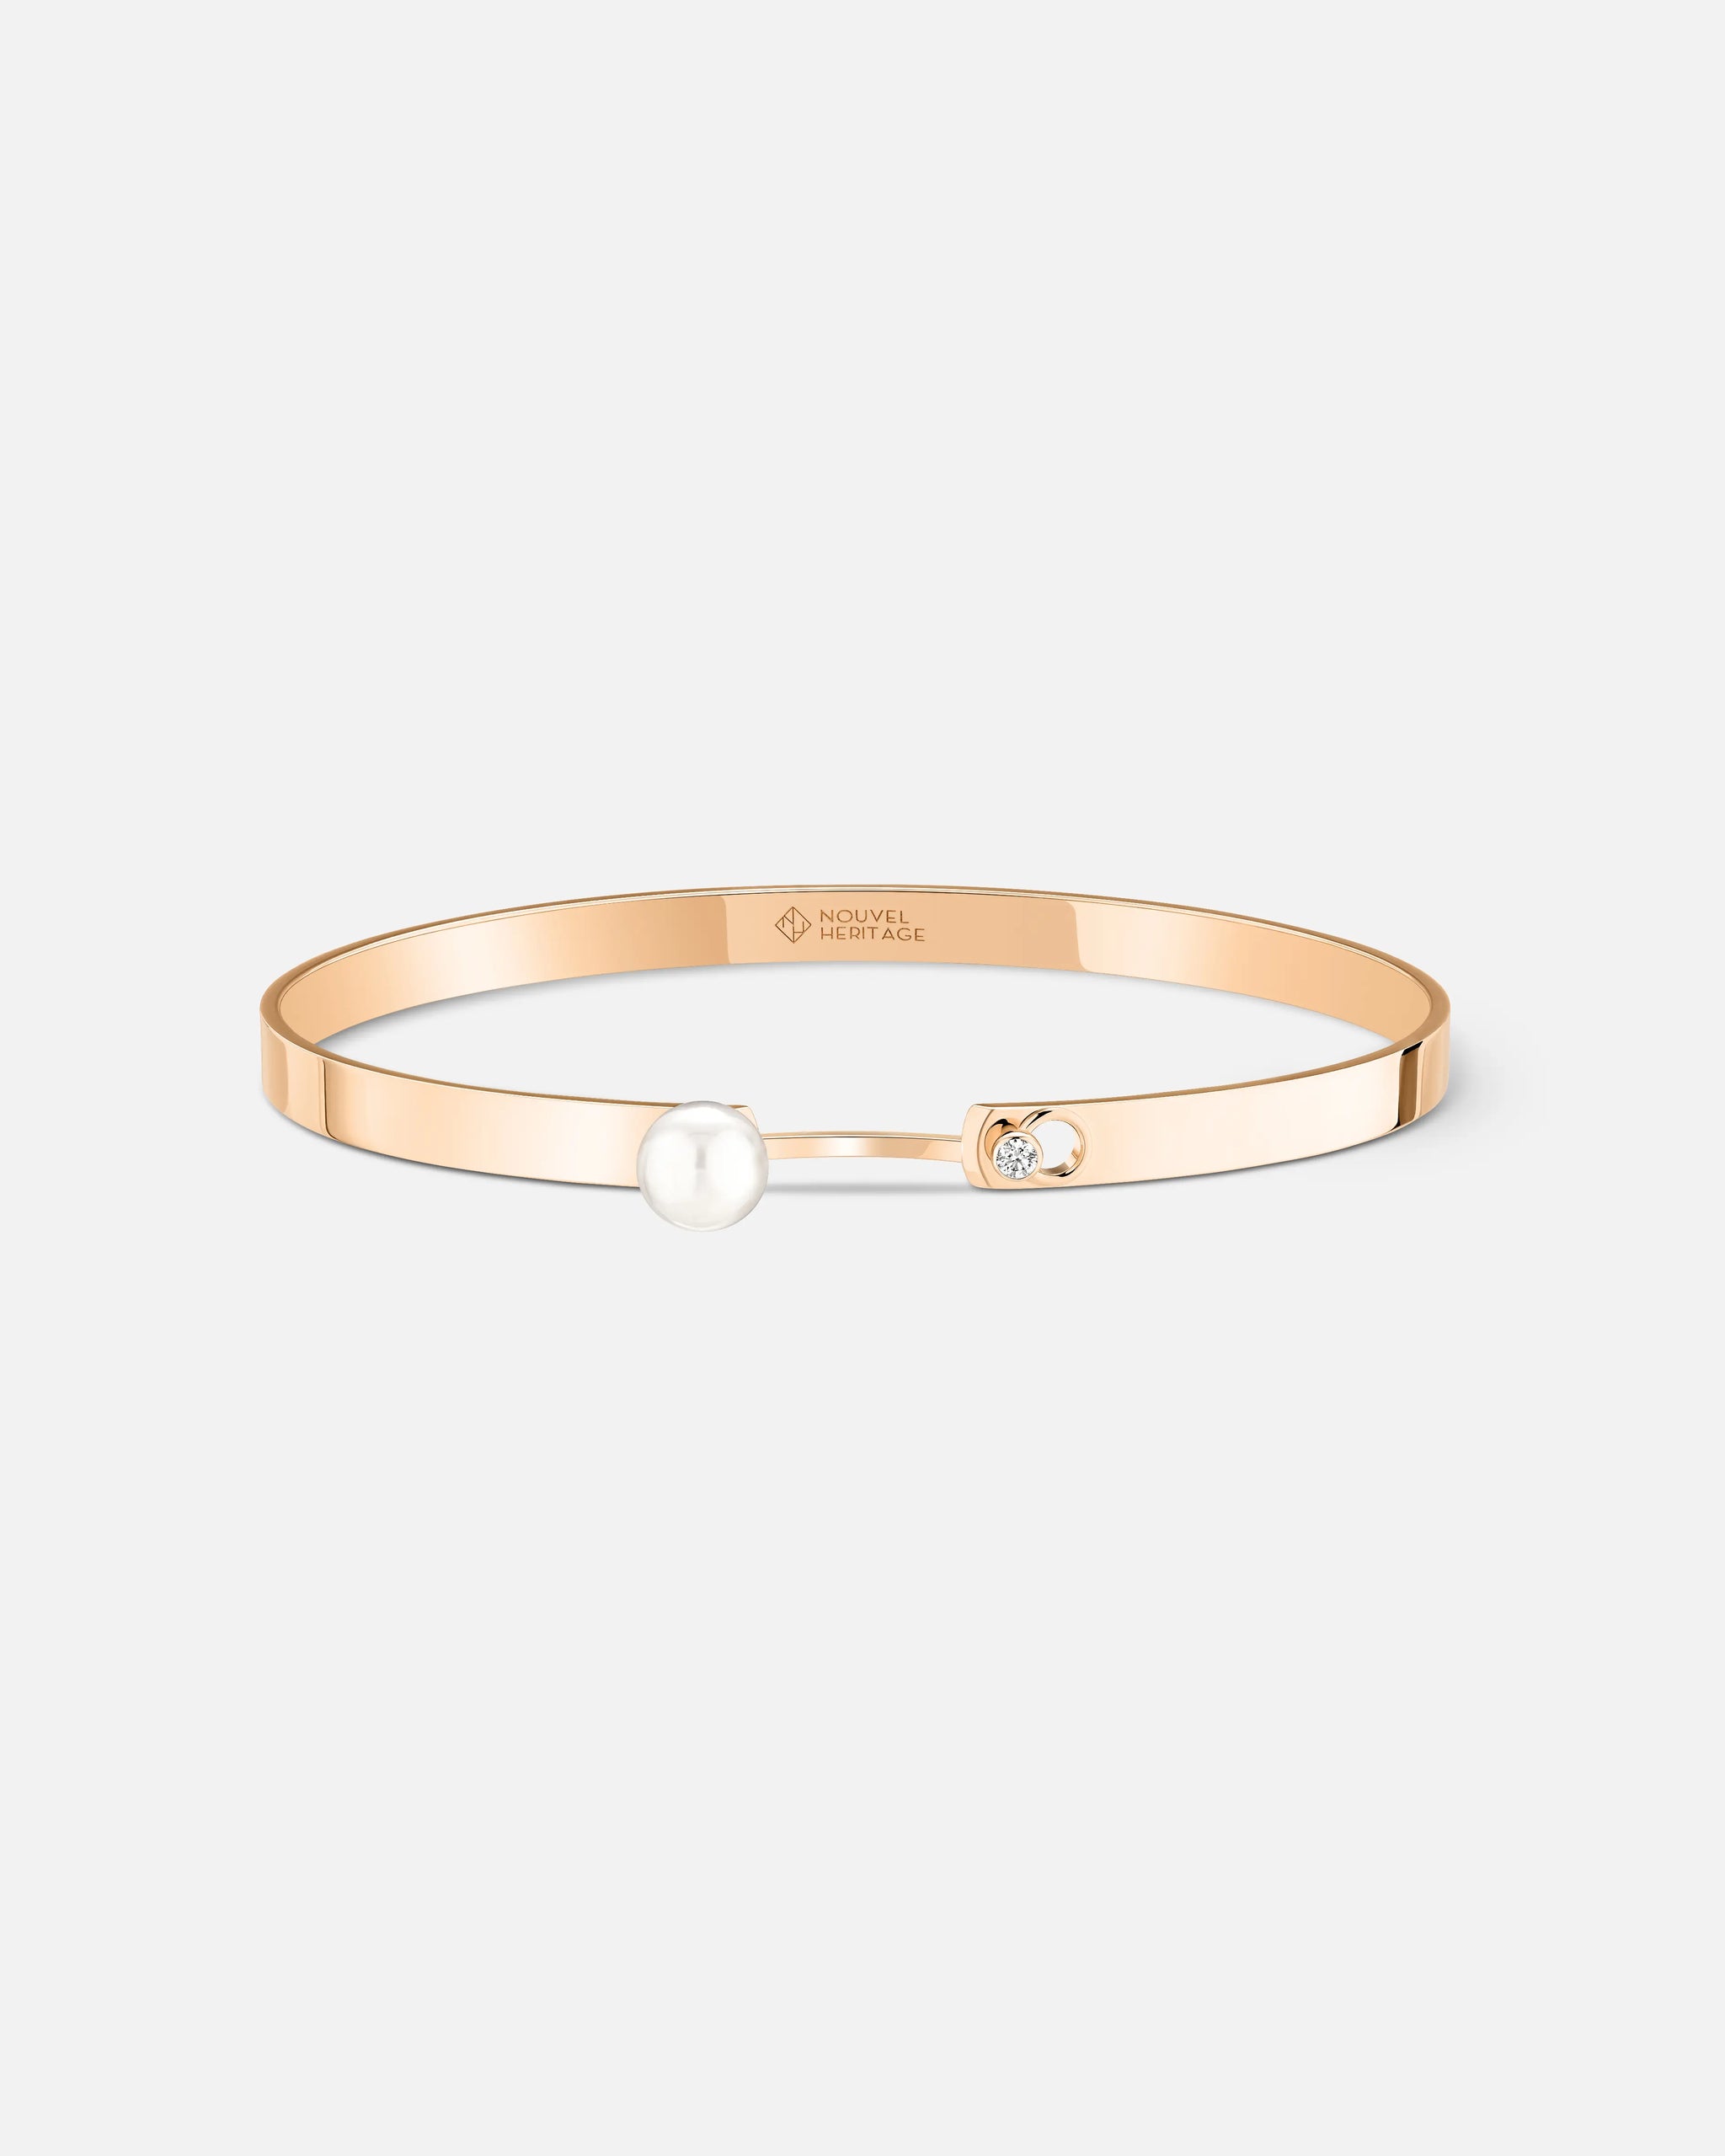 files/Mood_Bangle_Lunch-With-Mom_RG_NH21015_2.webp - Nouvel Heritage